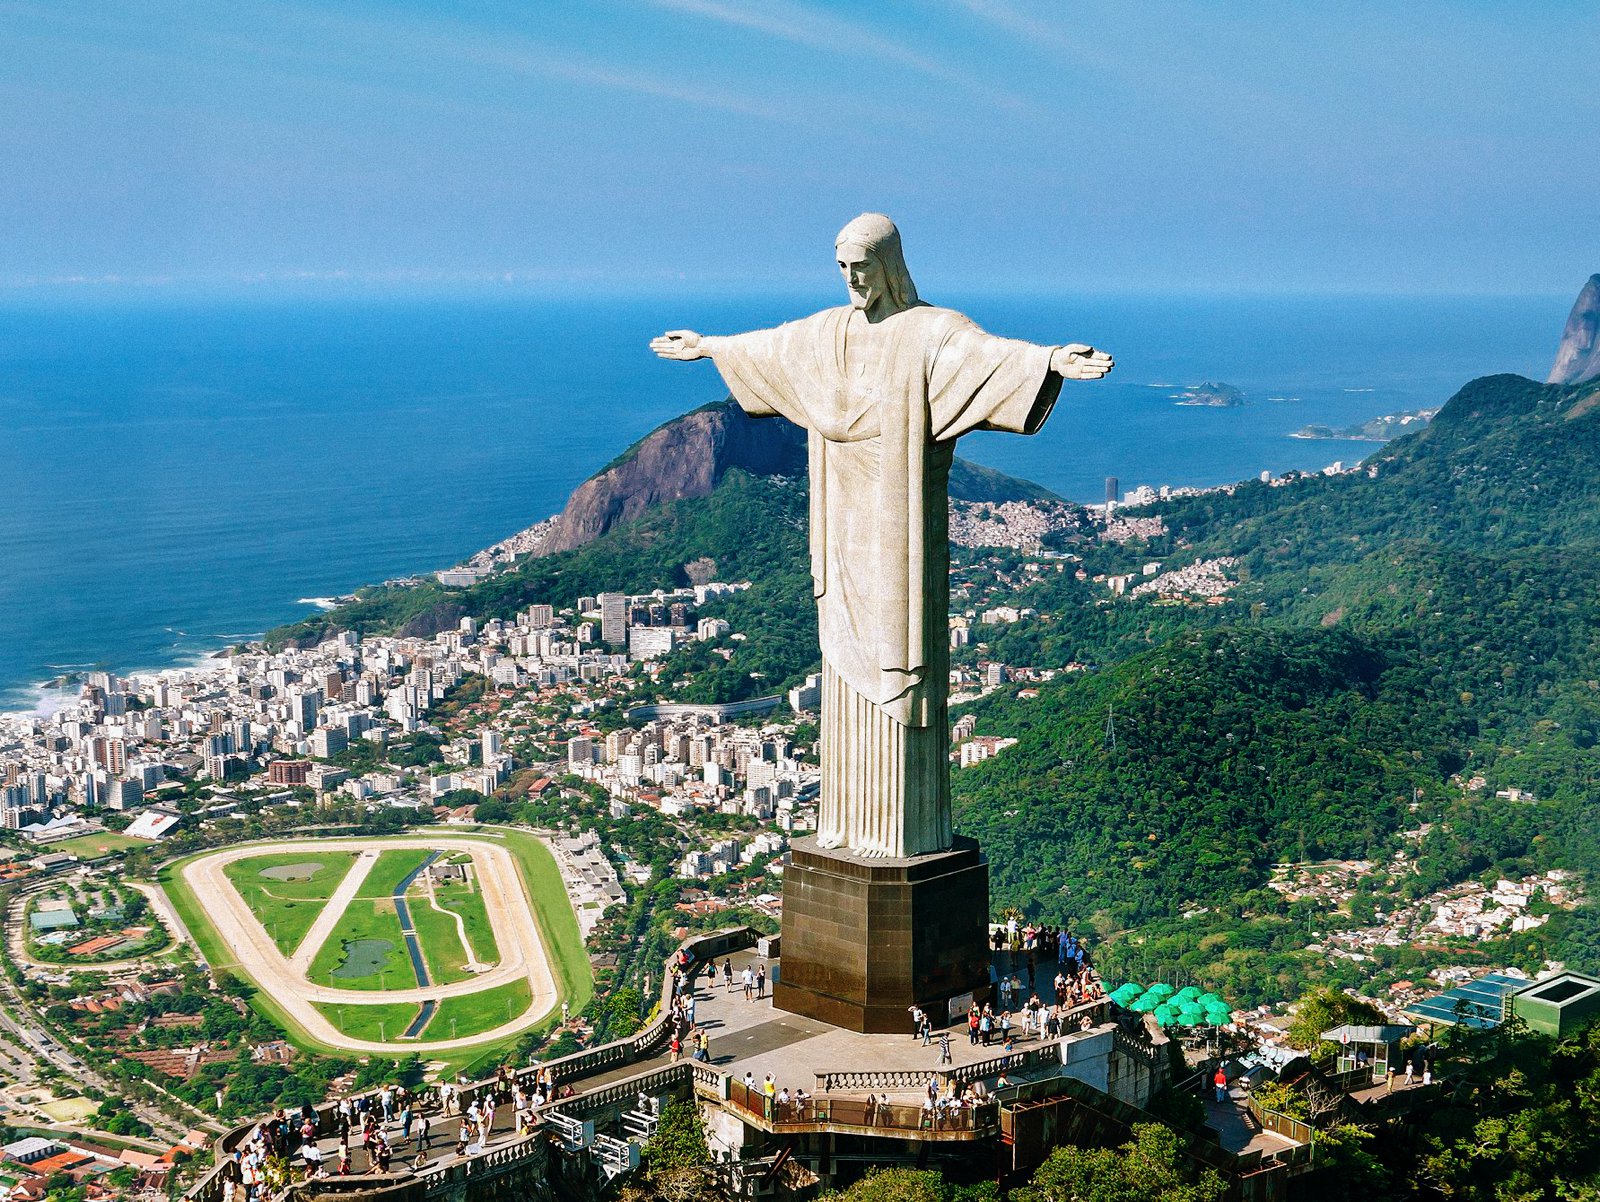 The Christ the Redeemer